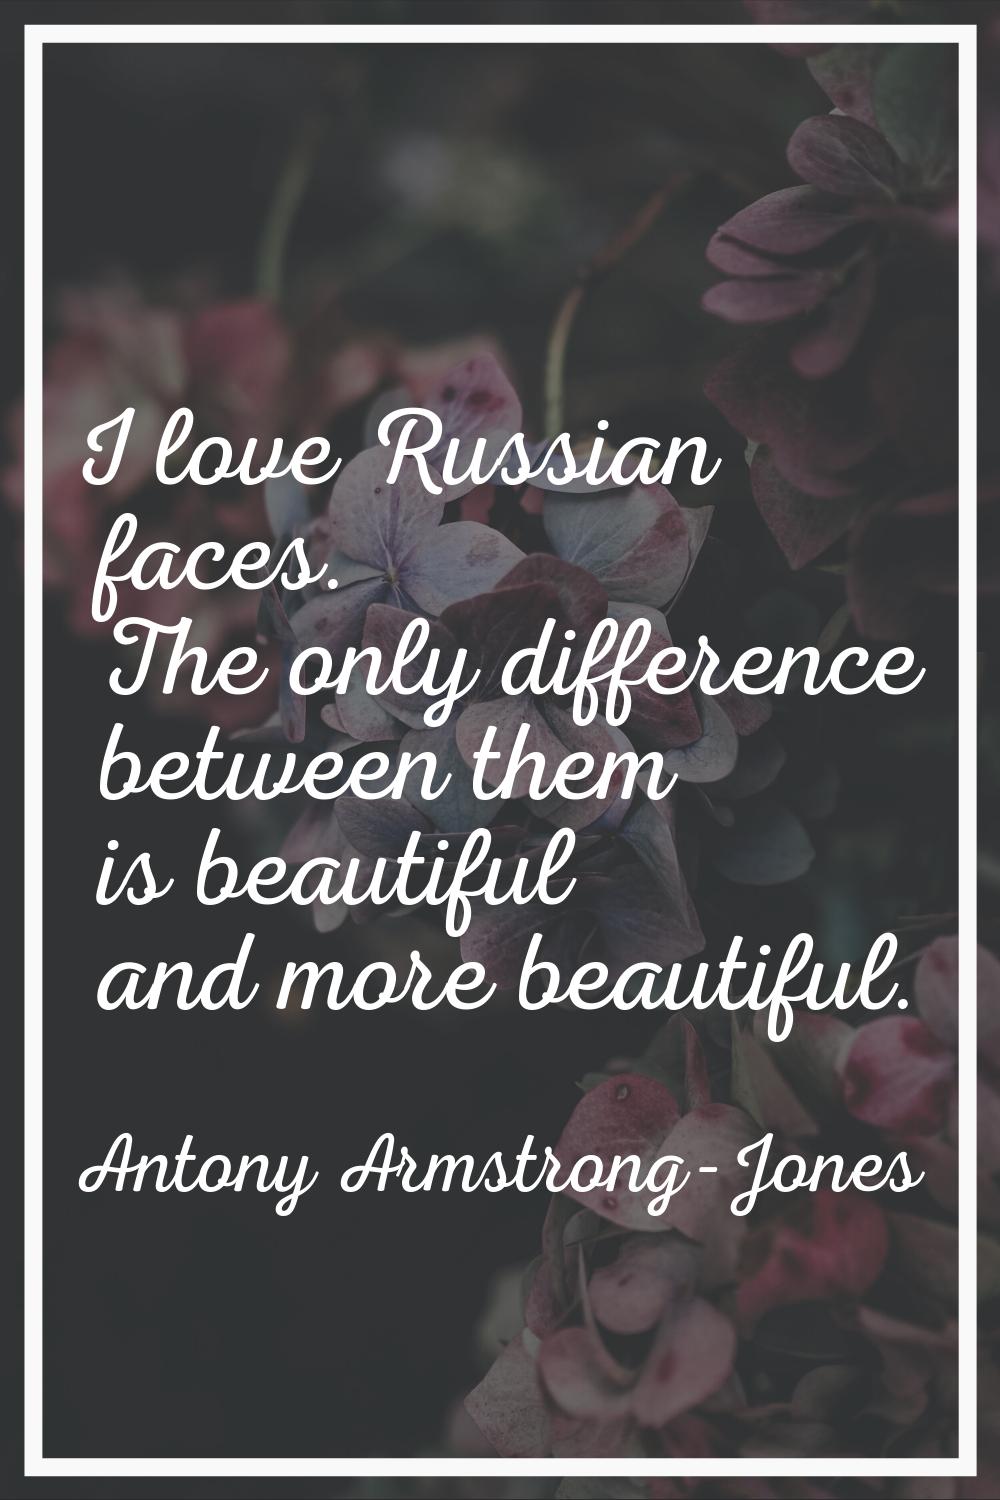 I love Russian faces. The only difference between them is beautiful and more beautiful.